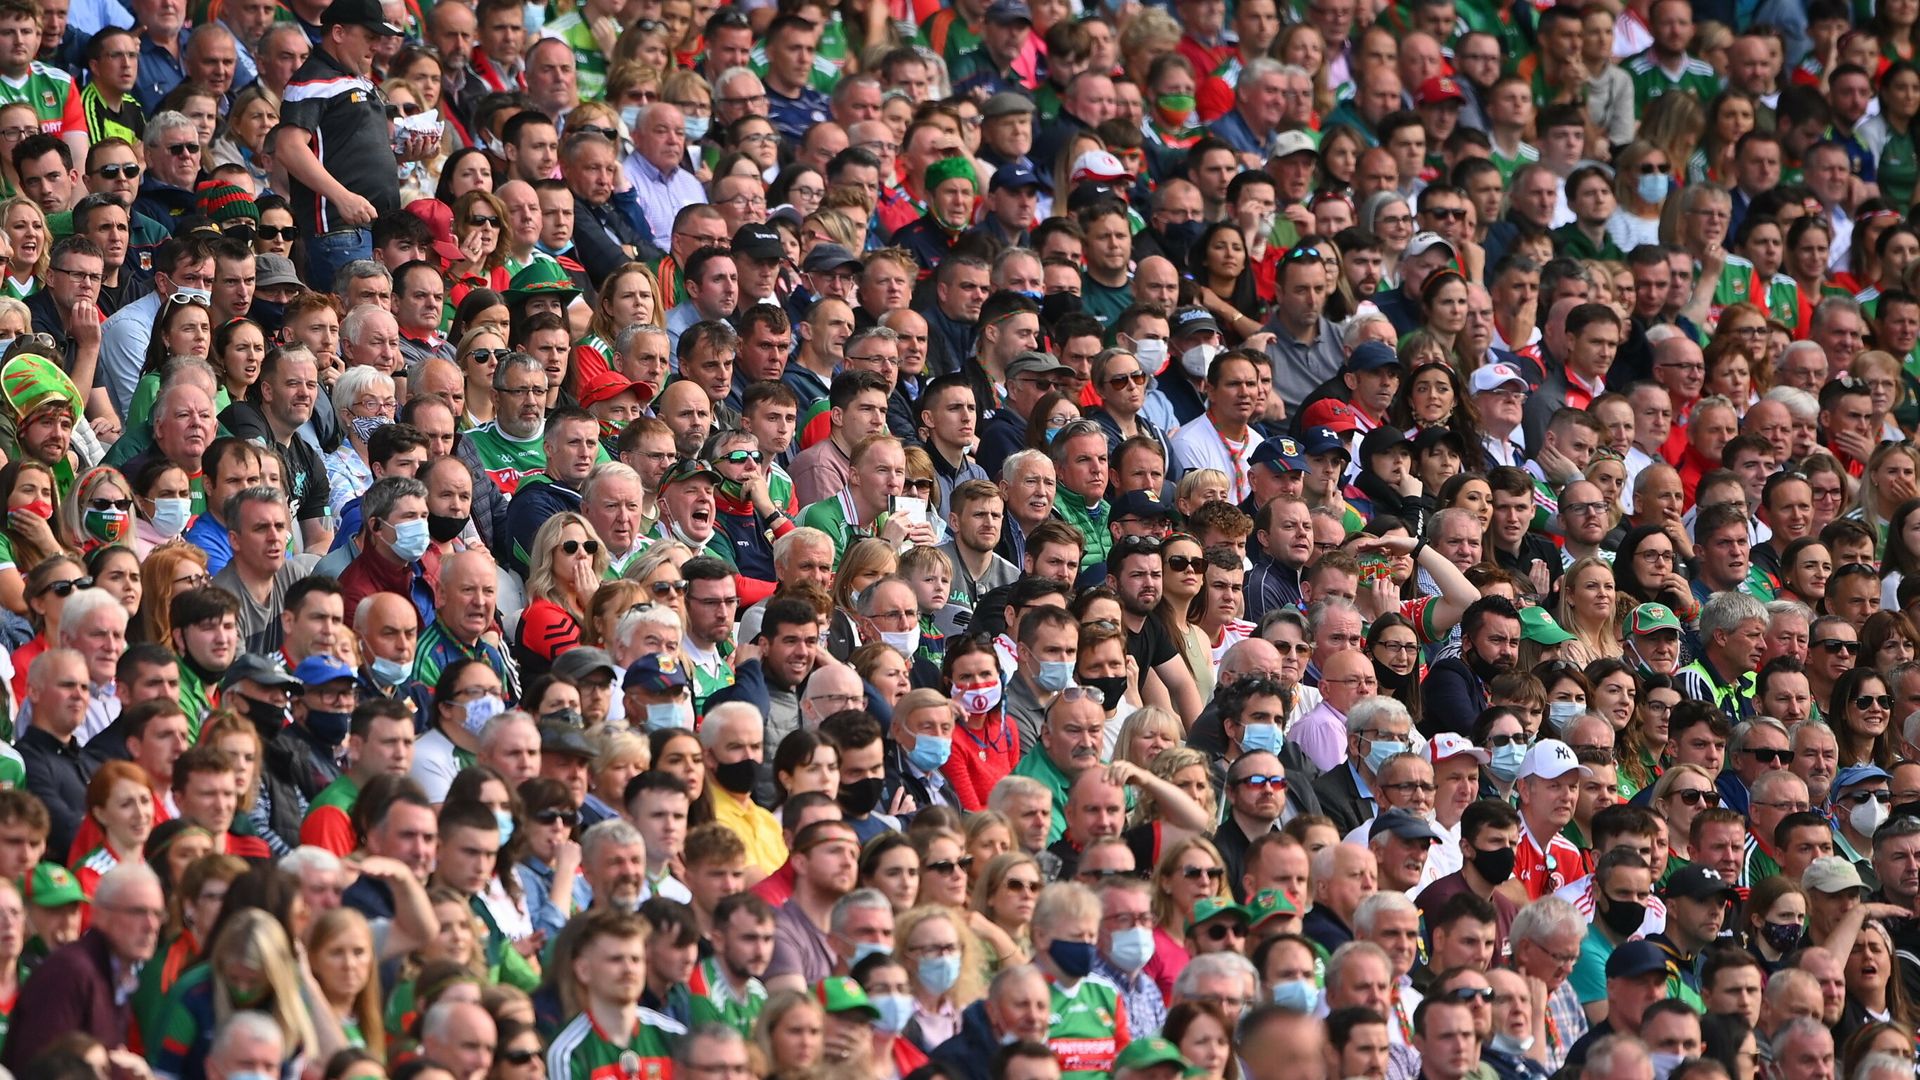 Sporting events in Ireland returning to full capacity